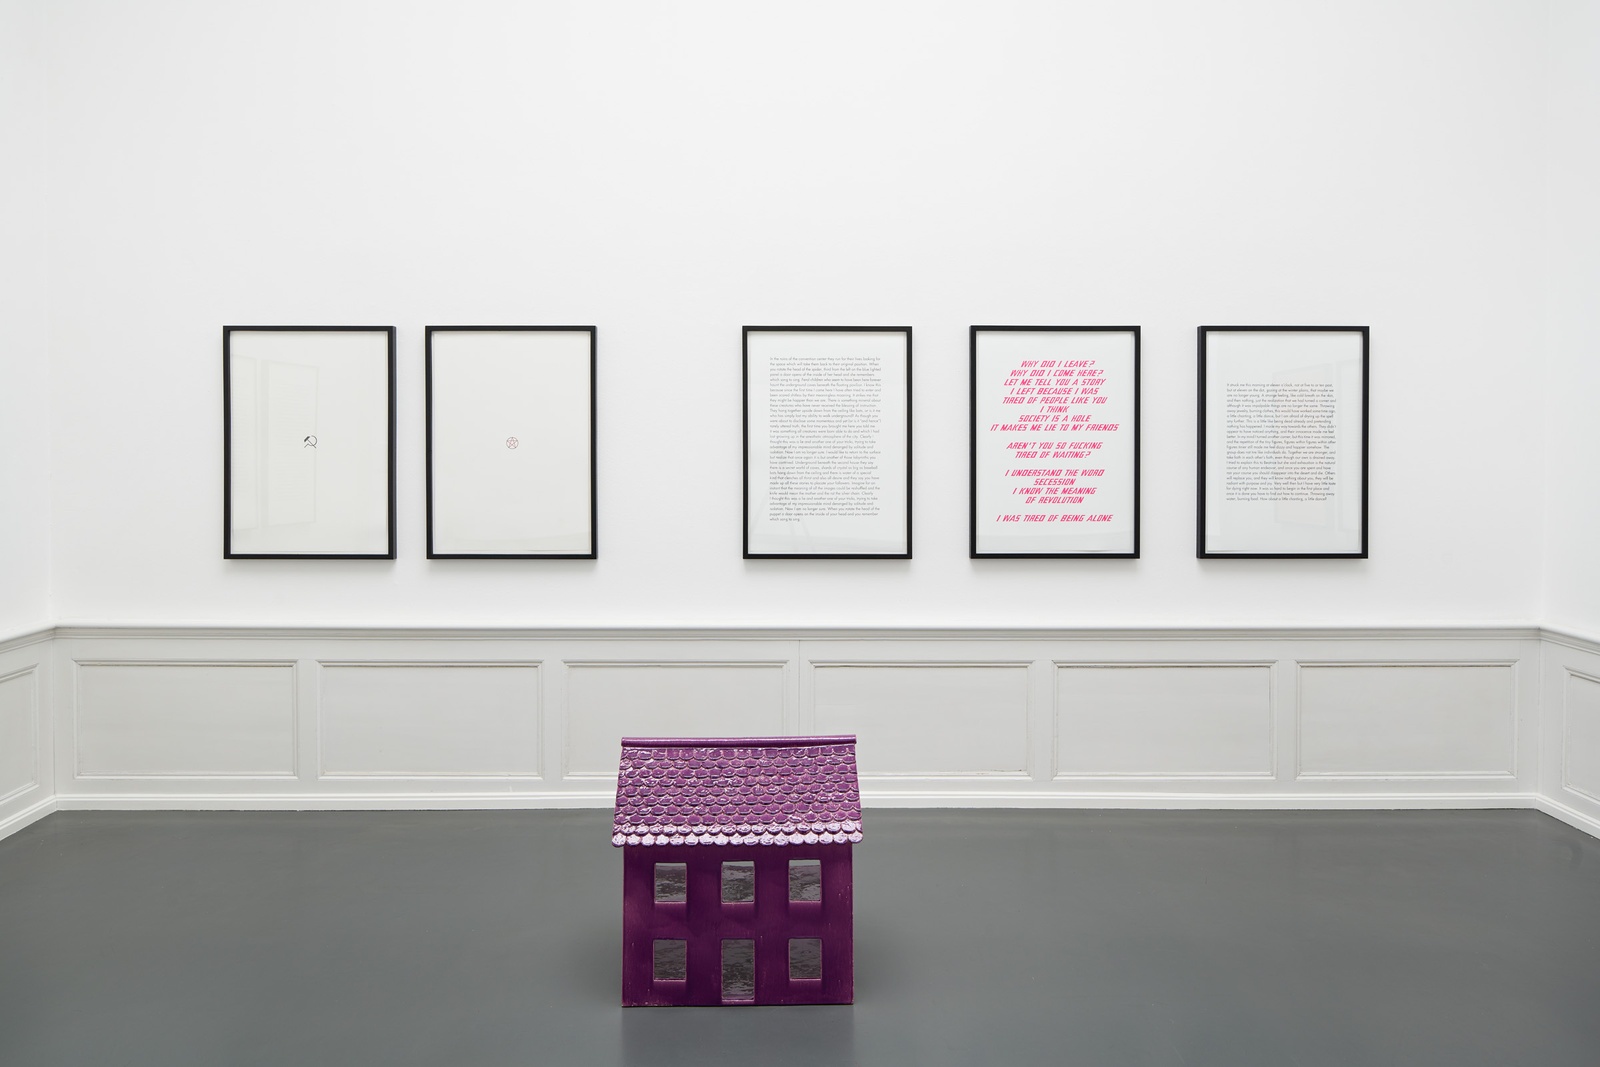 Mai-Thu Perret: Grammar and Glamour. July 12 – September 15, 2019